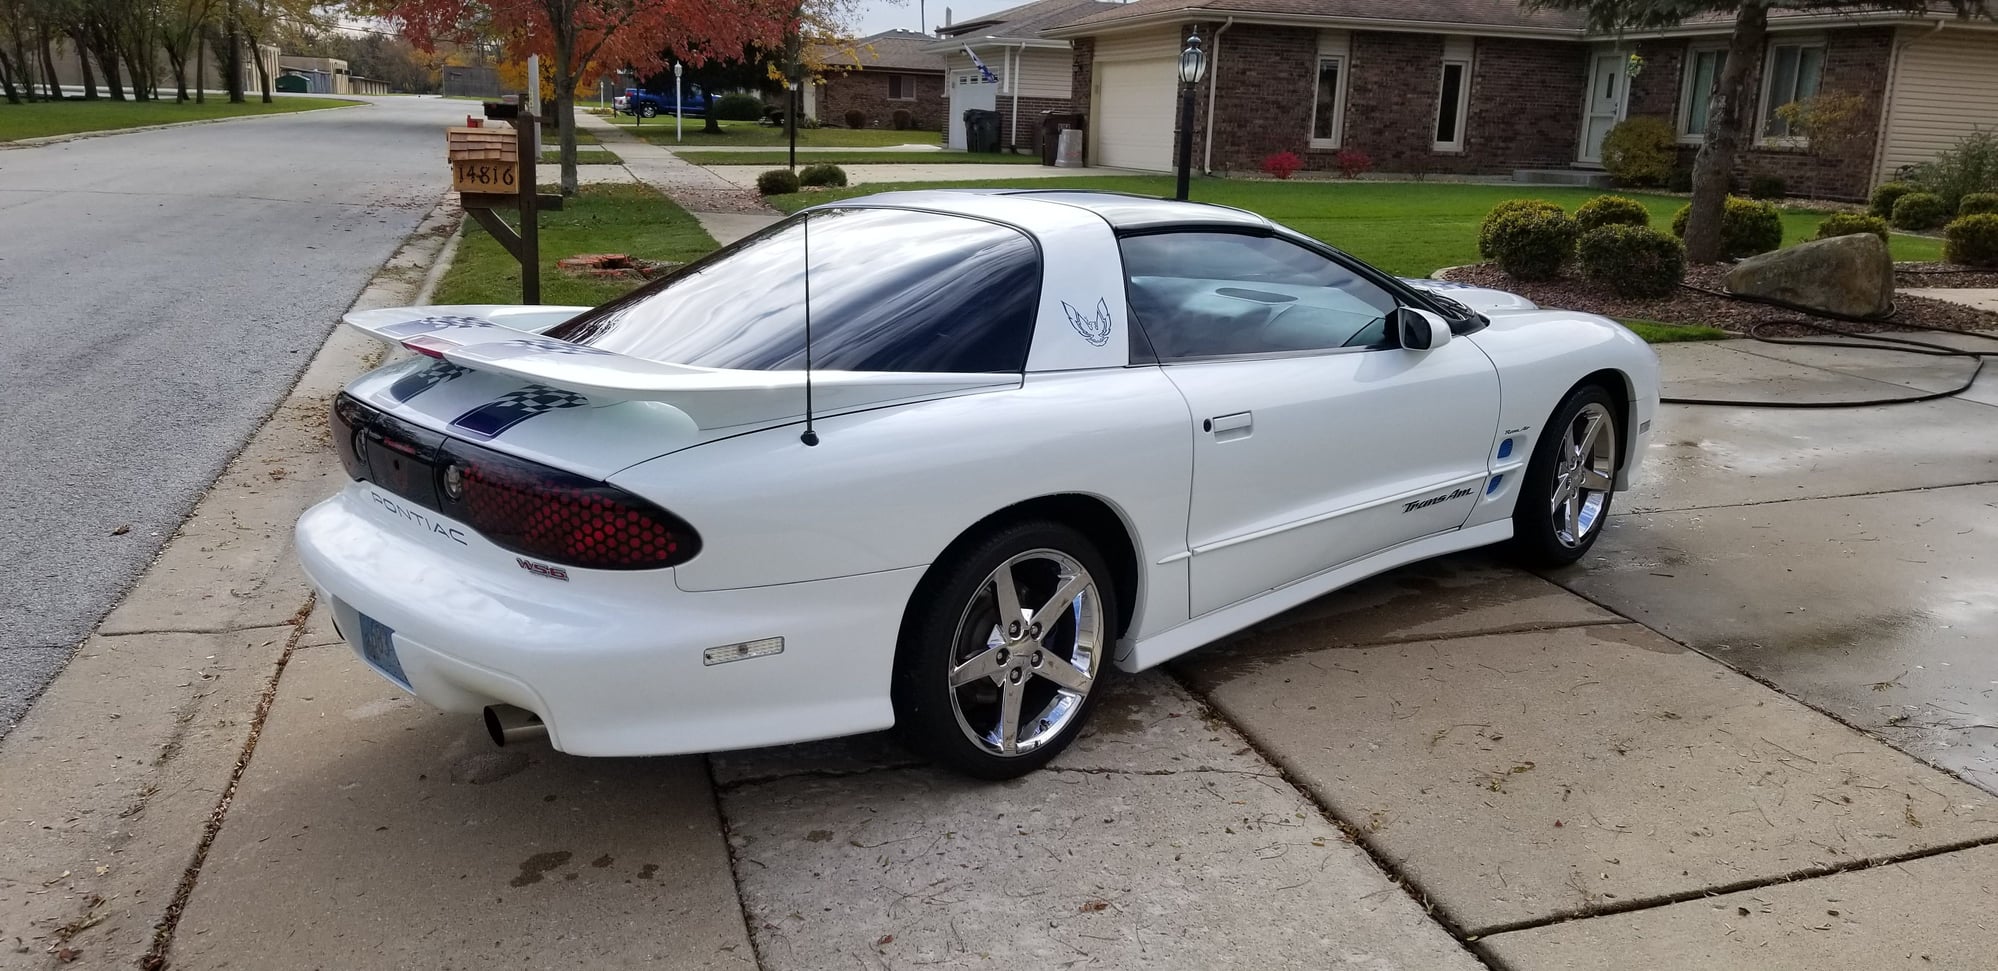 2002 Pontiac Firebird - 2002 WS6 Supercharged - Used - VIN 2G2FV22G422117314 - 69,000 Miles - 8 cyl - 2WD - Automatic - Coupe - White - Oak Forest, IL 60452, United States